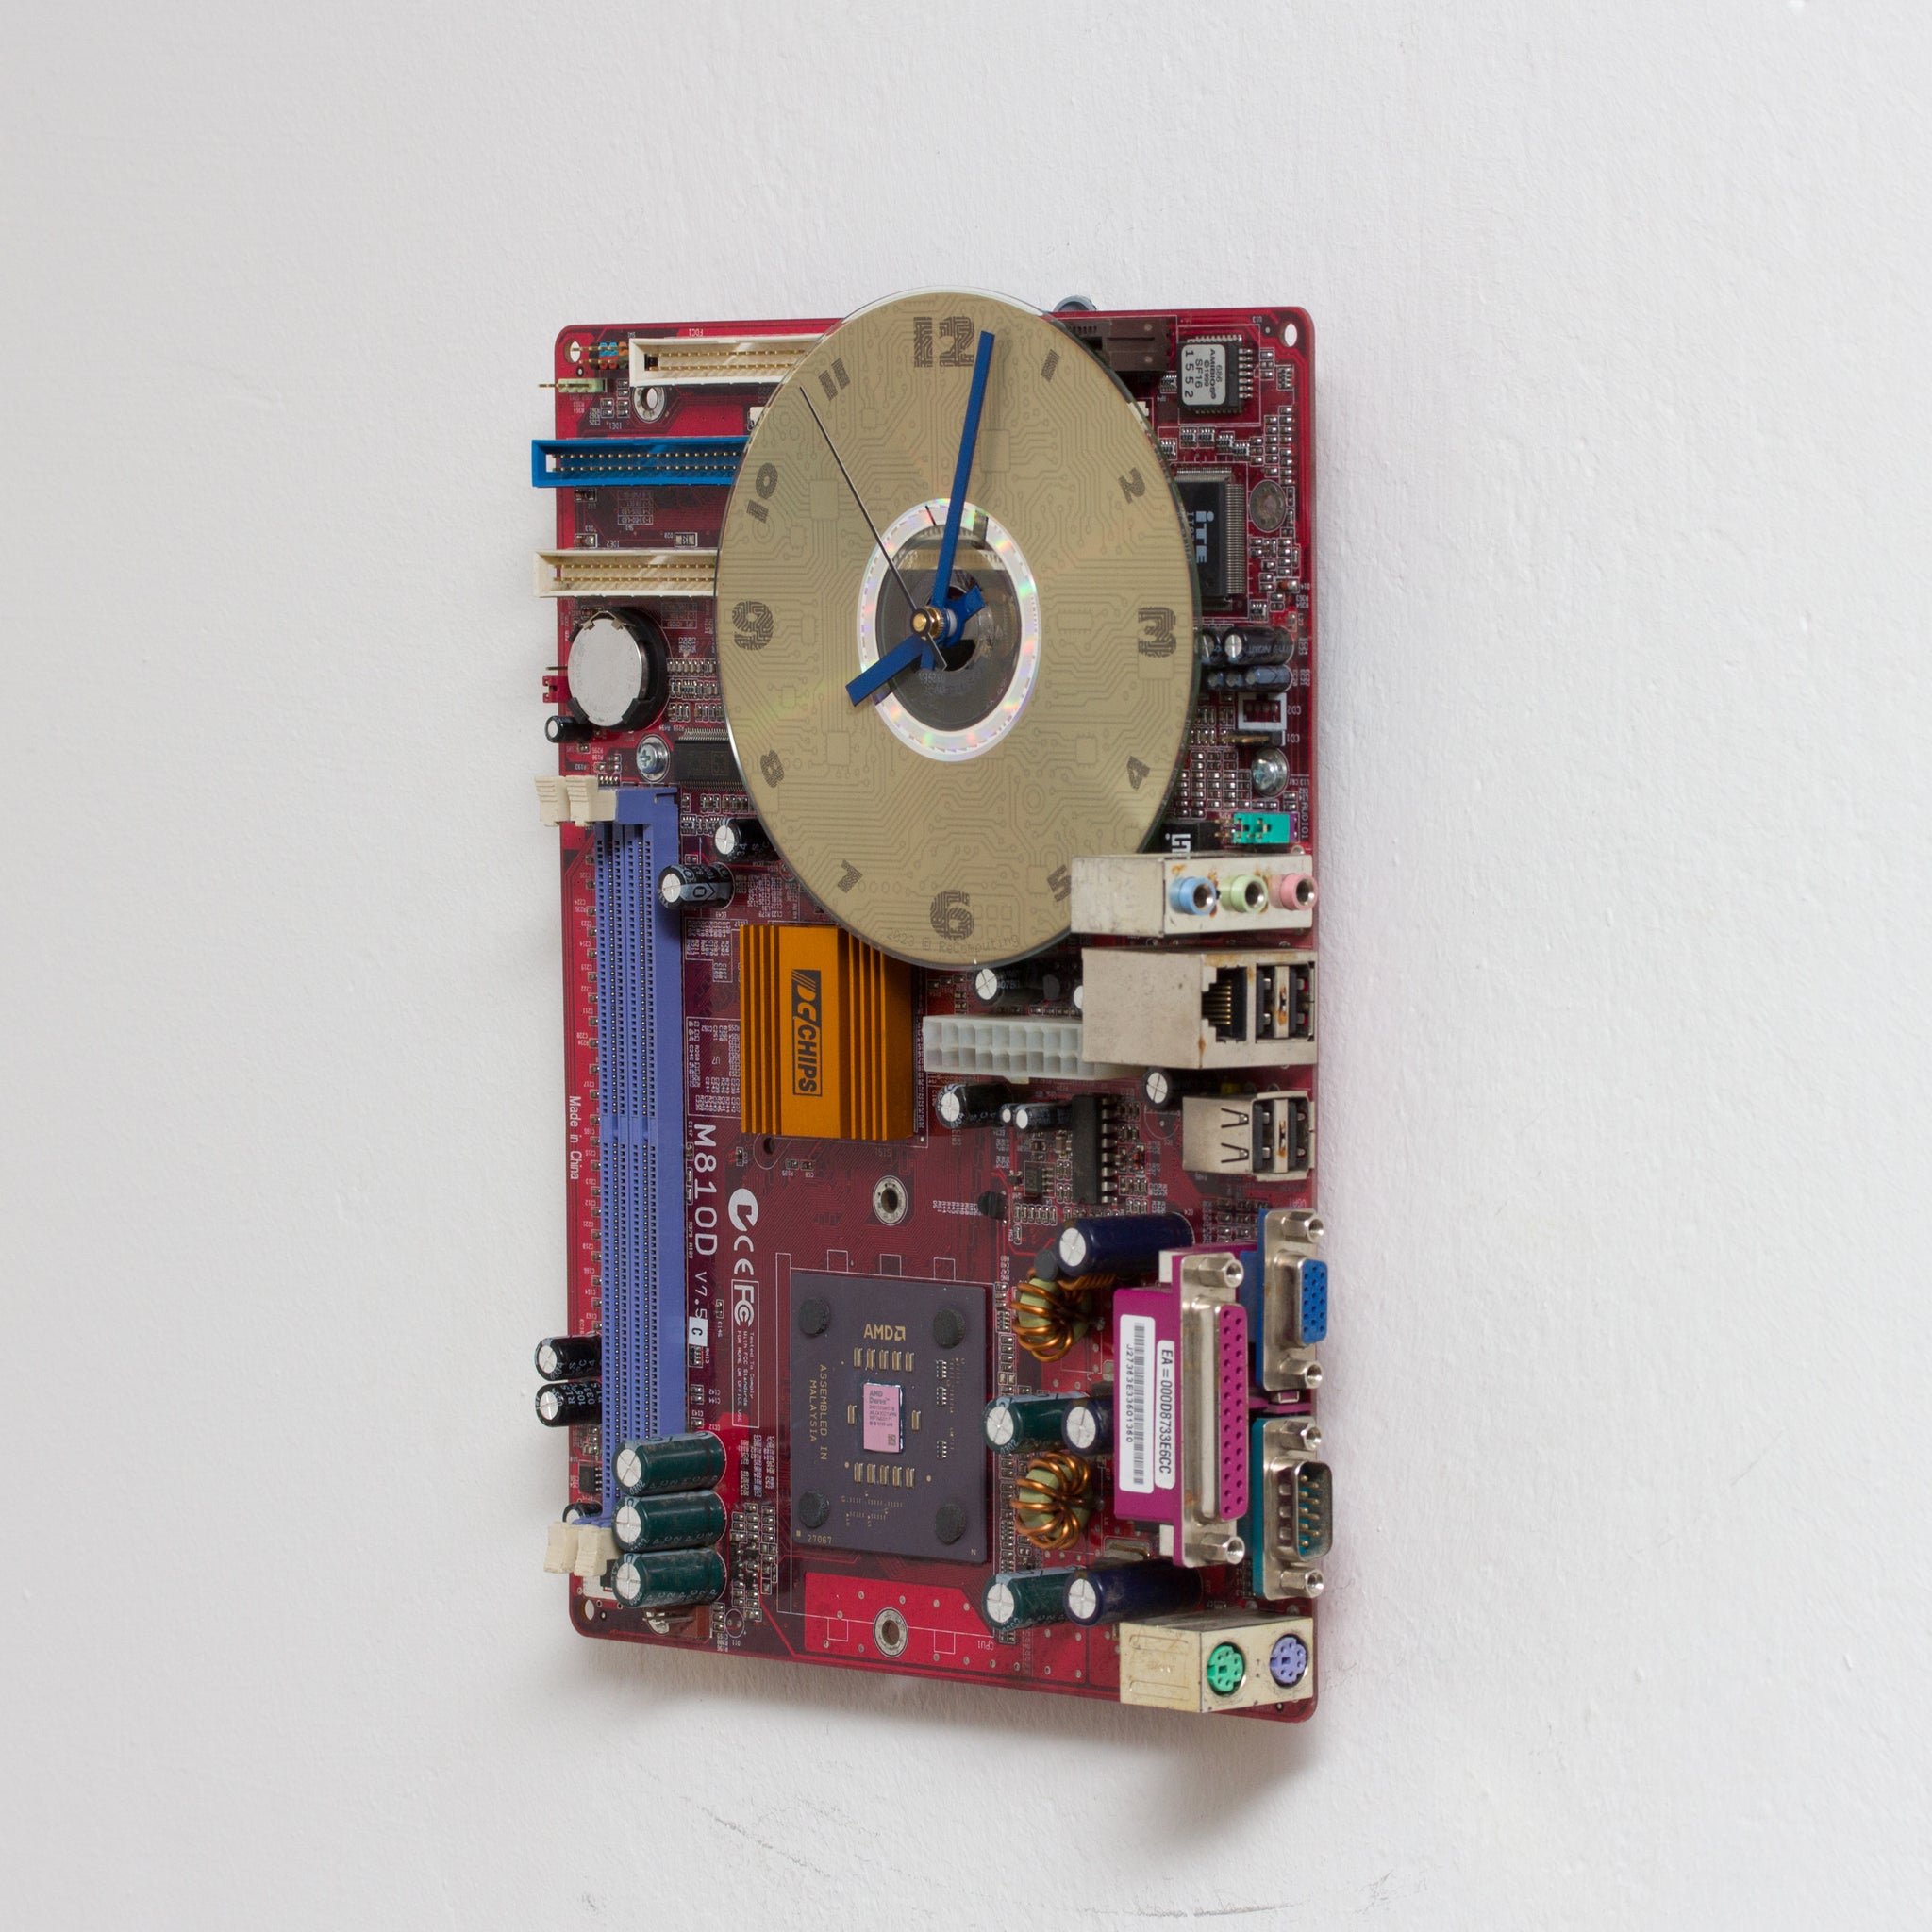 Geeky Wall Clock made of red Circuit Board